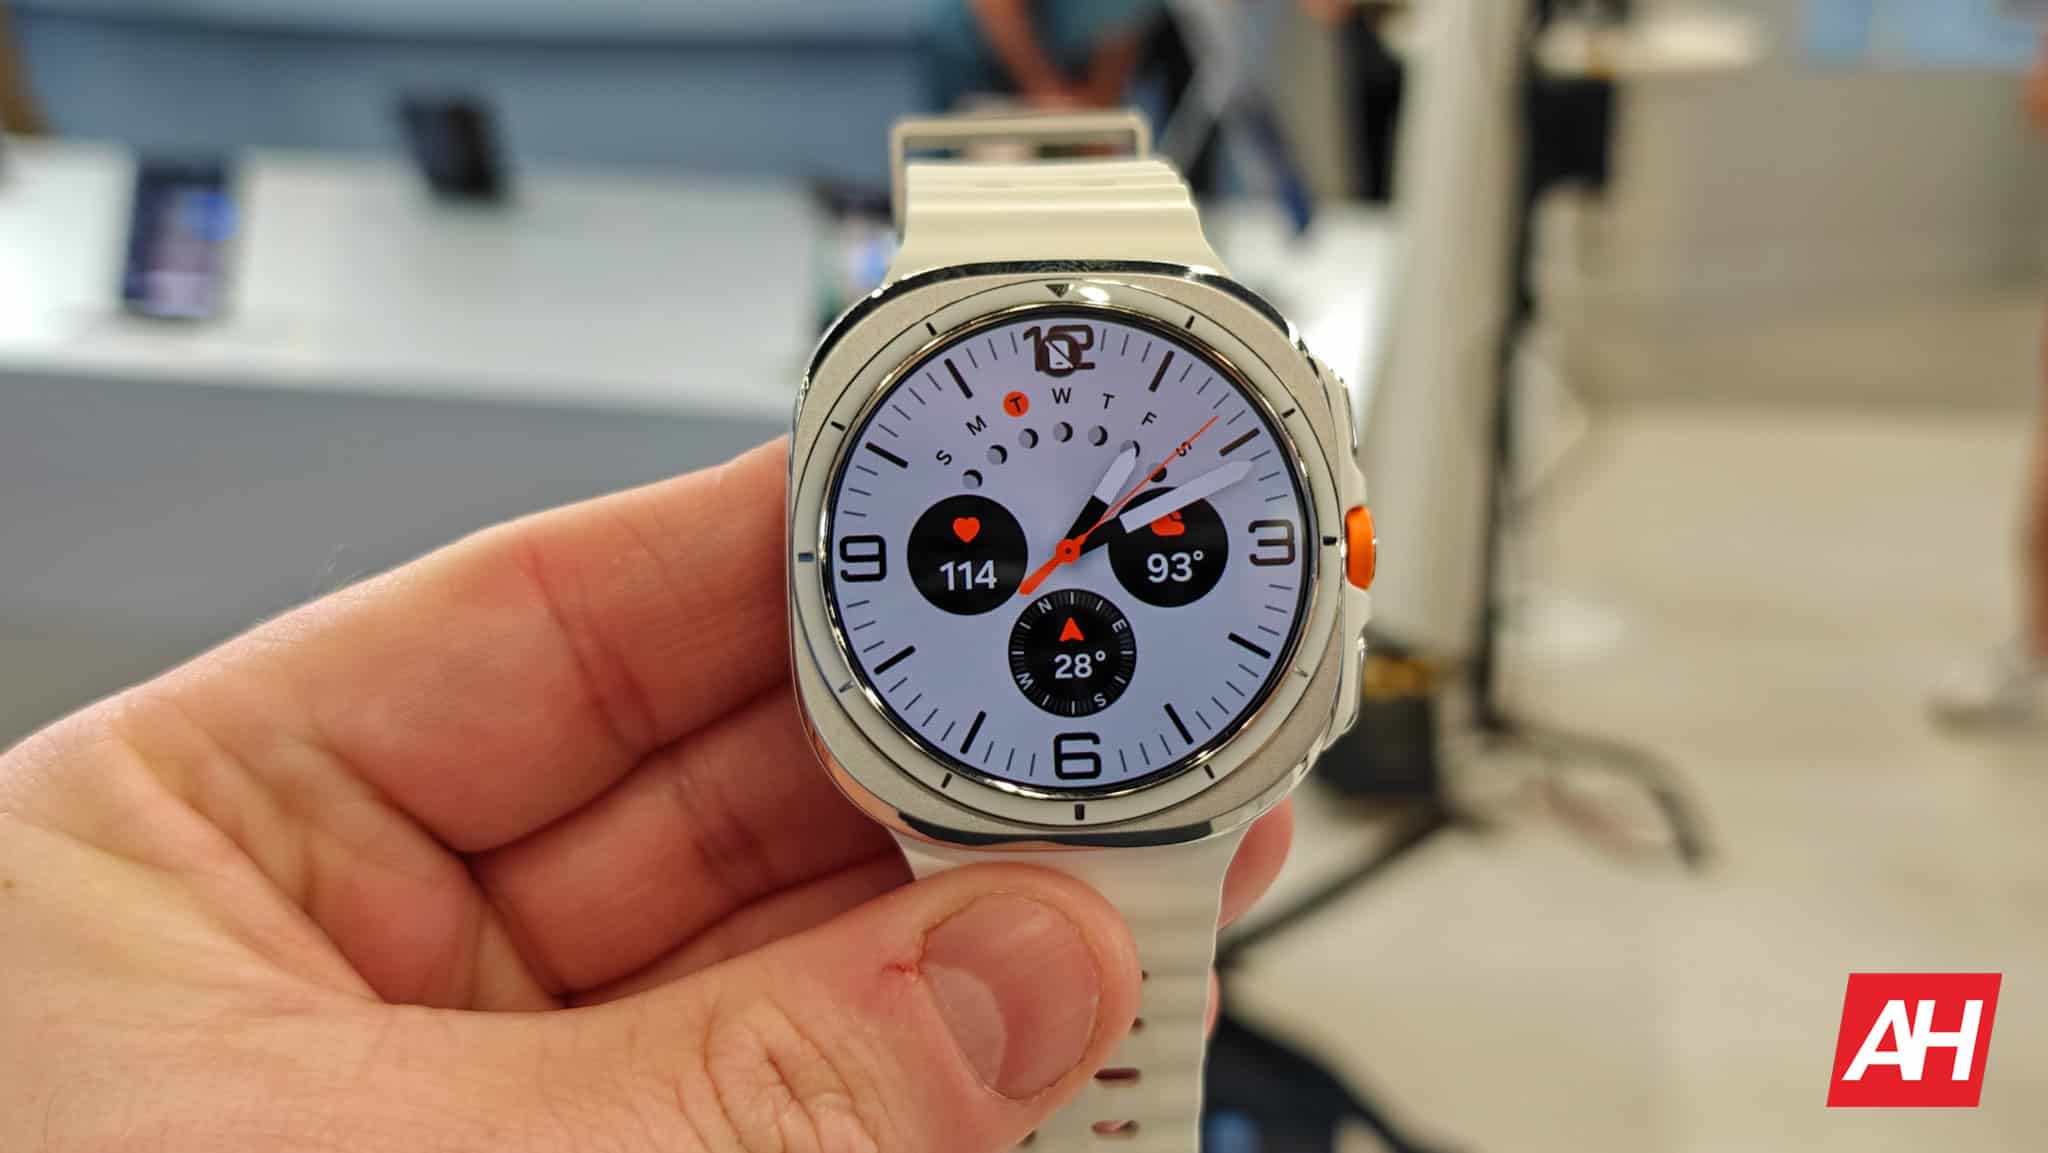 Wear OS 5 may get Bluetooth LE Audio for improved battery life